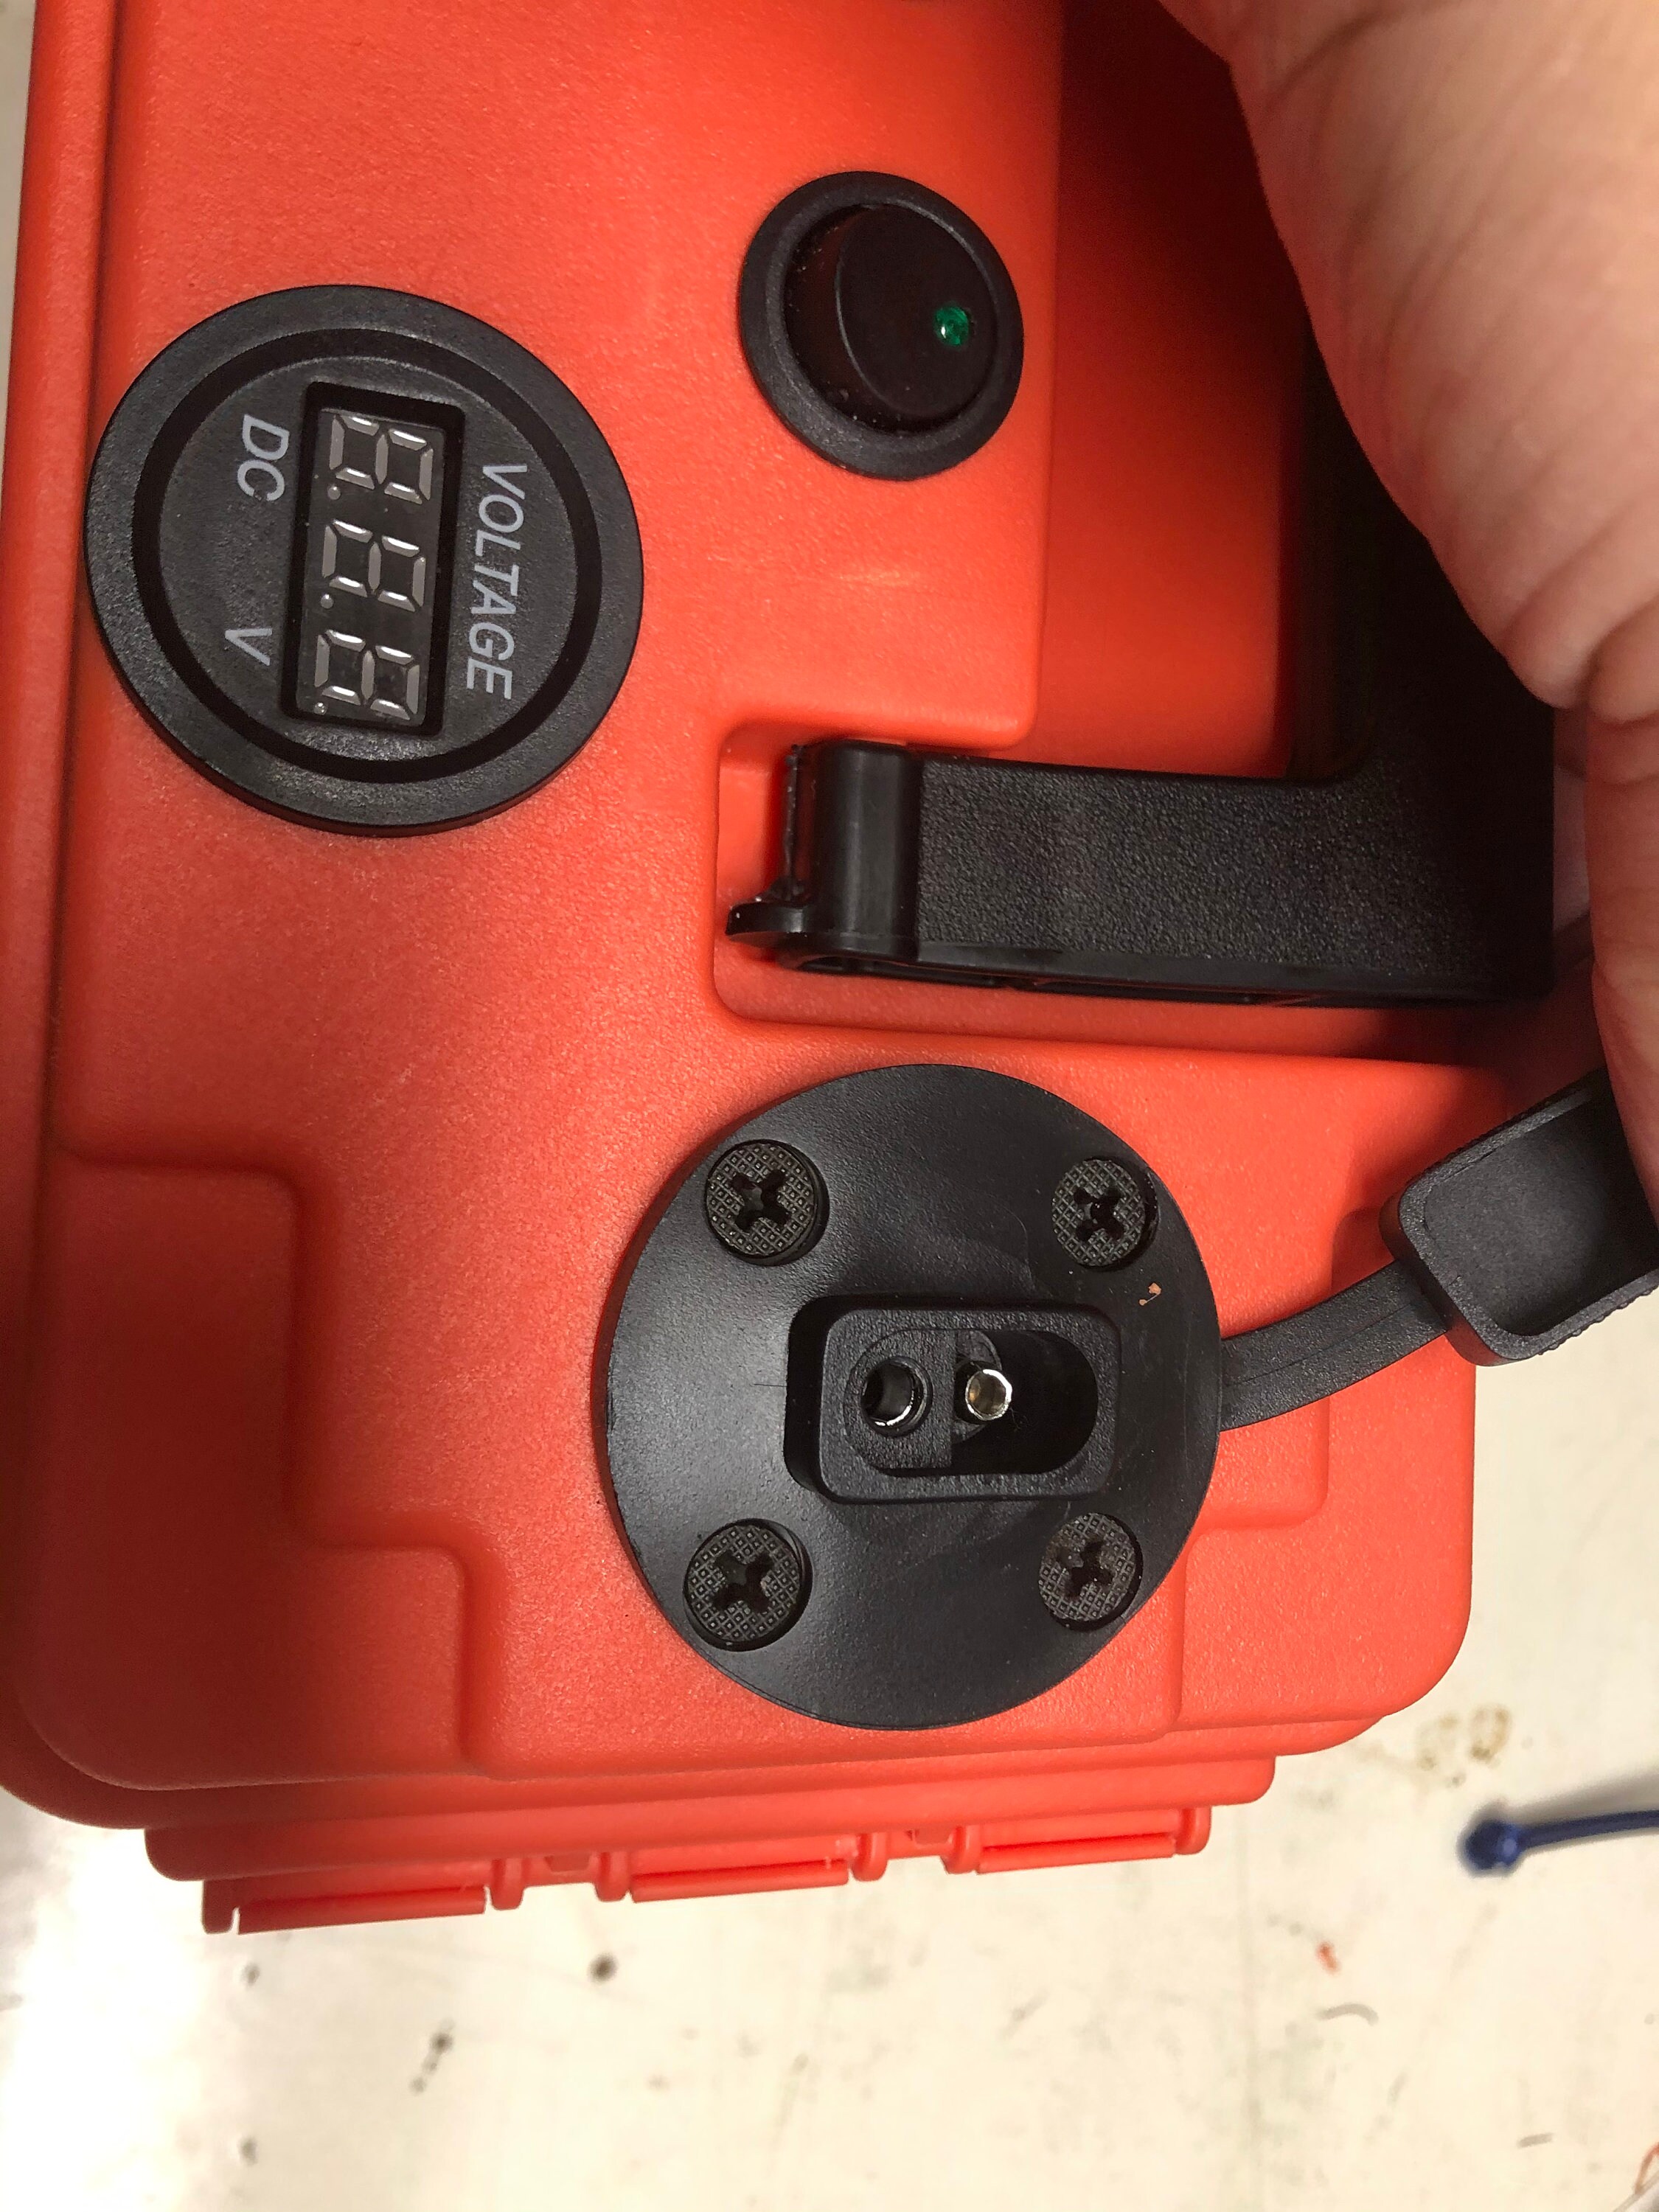 Battery Box for Ice Fishing, Camping, Hunting, Fishing and More 